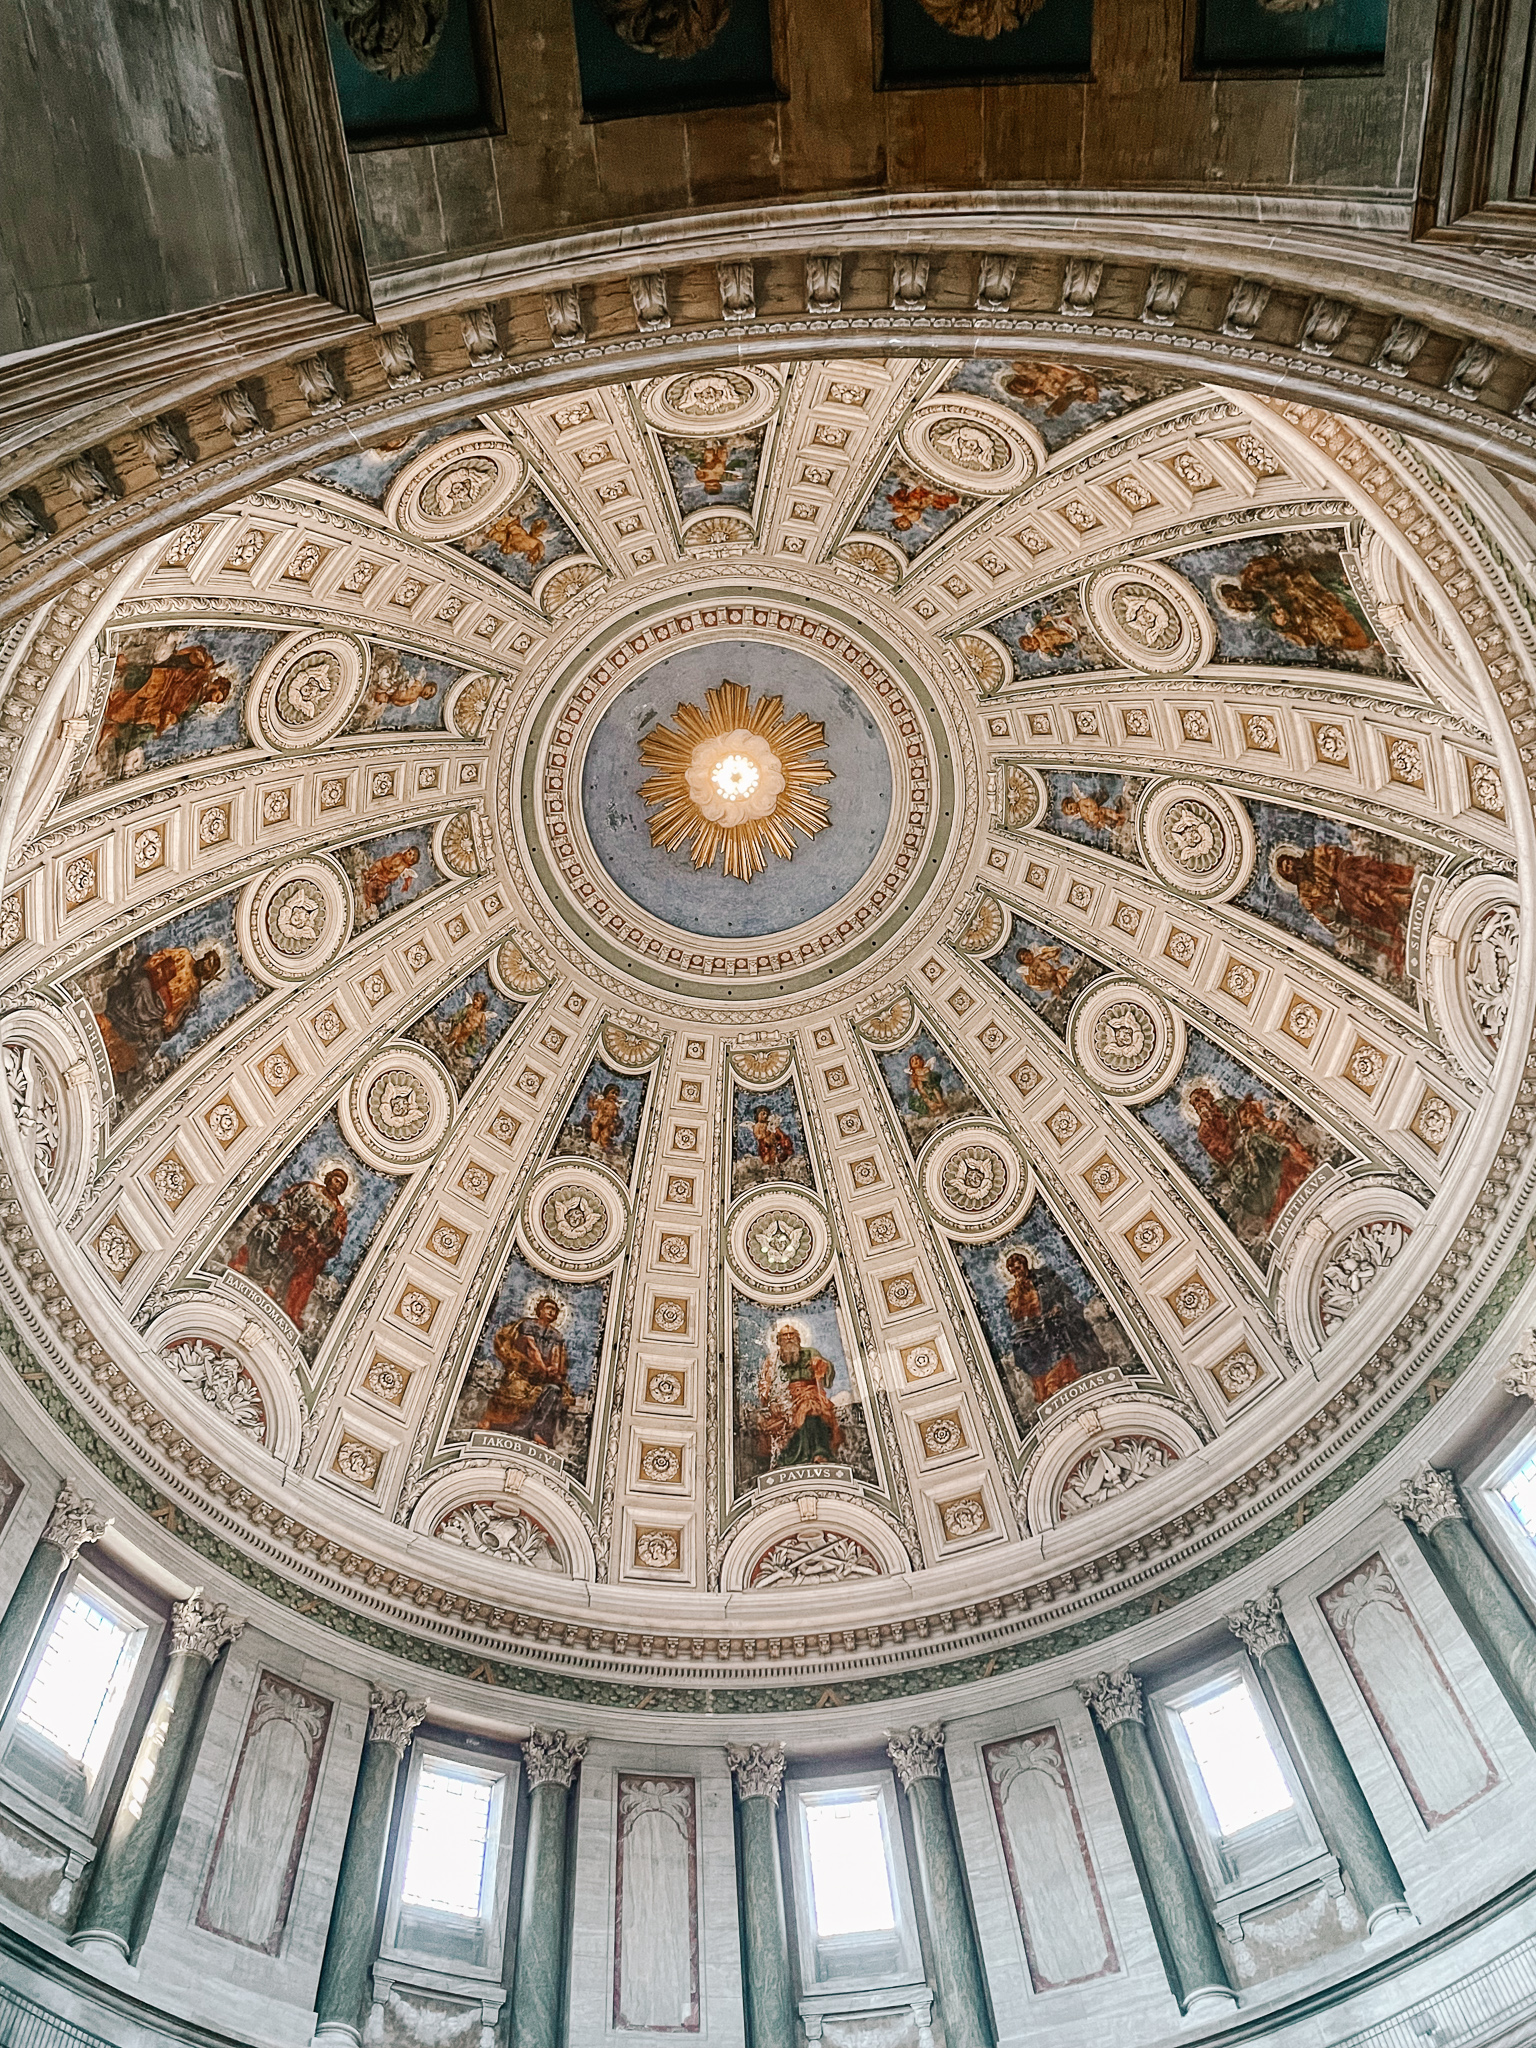 The domed roof of the Marble church in Copenhagen. It has a sun design in the center with rows of frescoes and ornate white marble designs radiating from the middle to the outside of the dome.